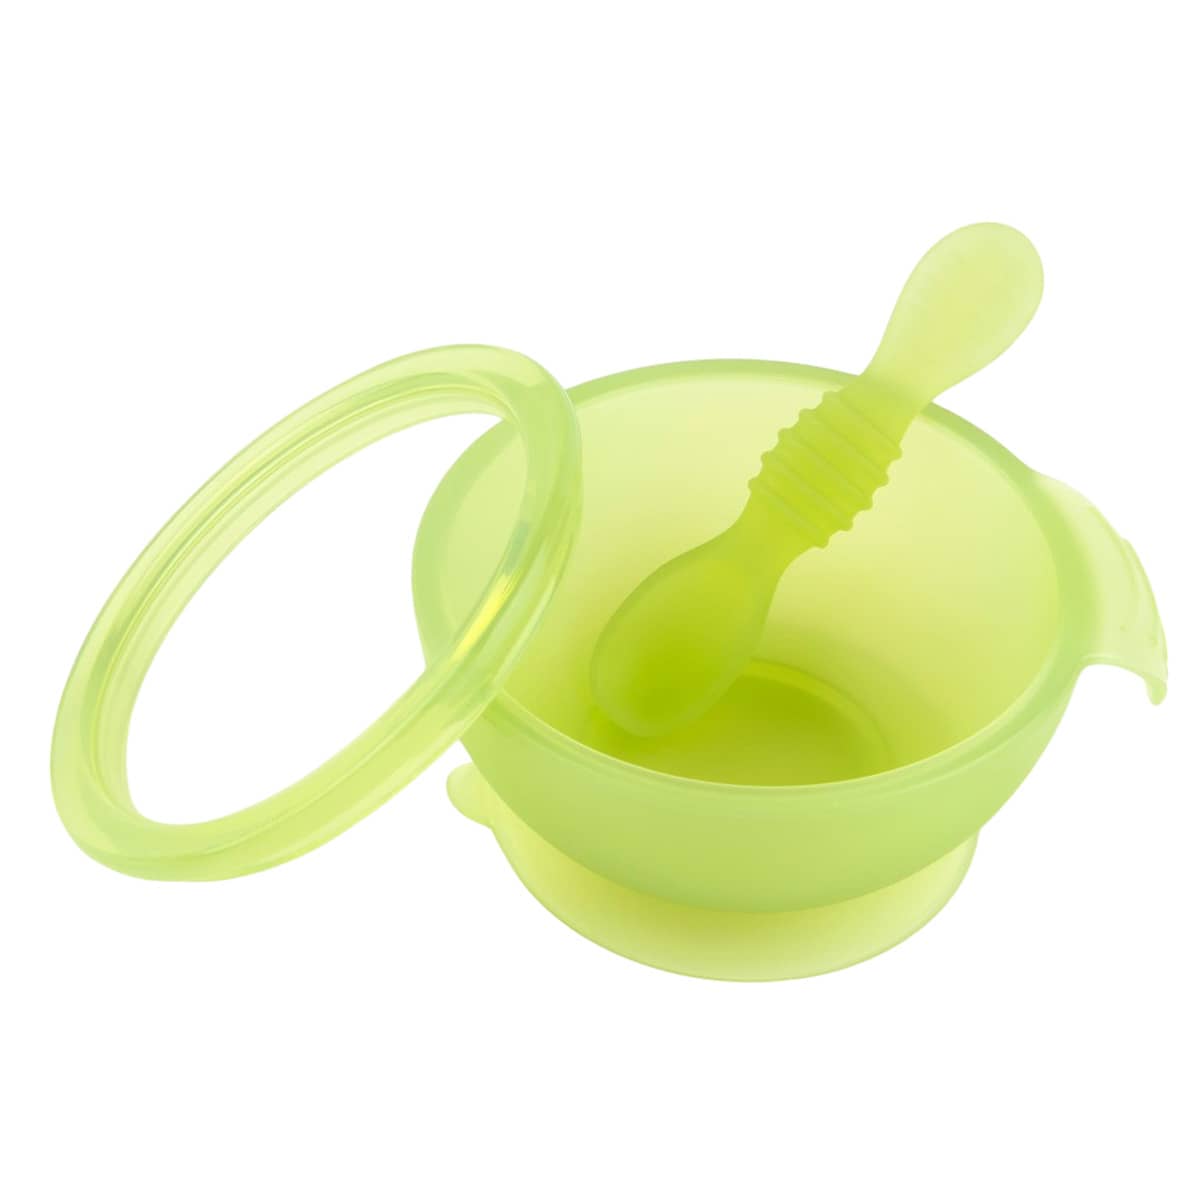 Bumkins Silicone First Feeding Set - Jelly Silicone - Green